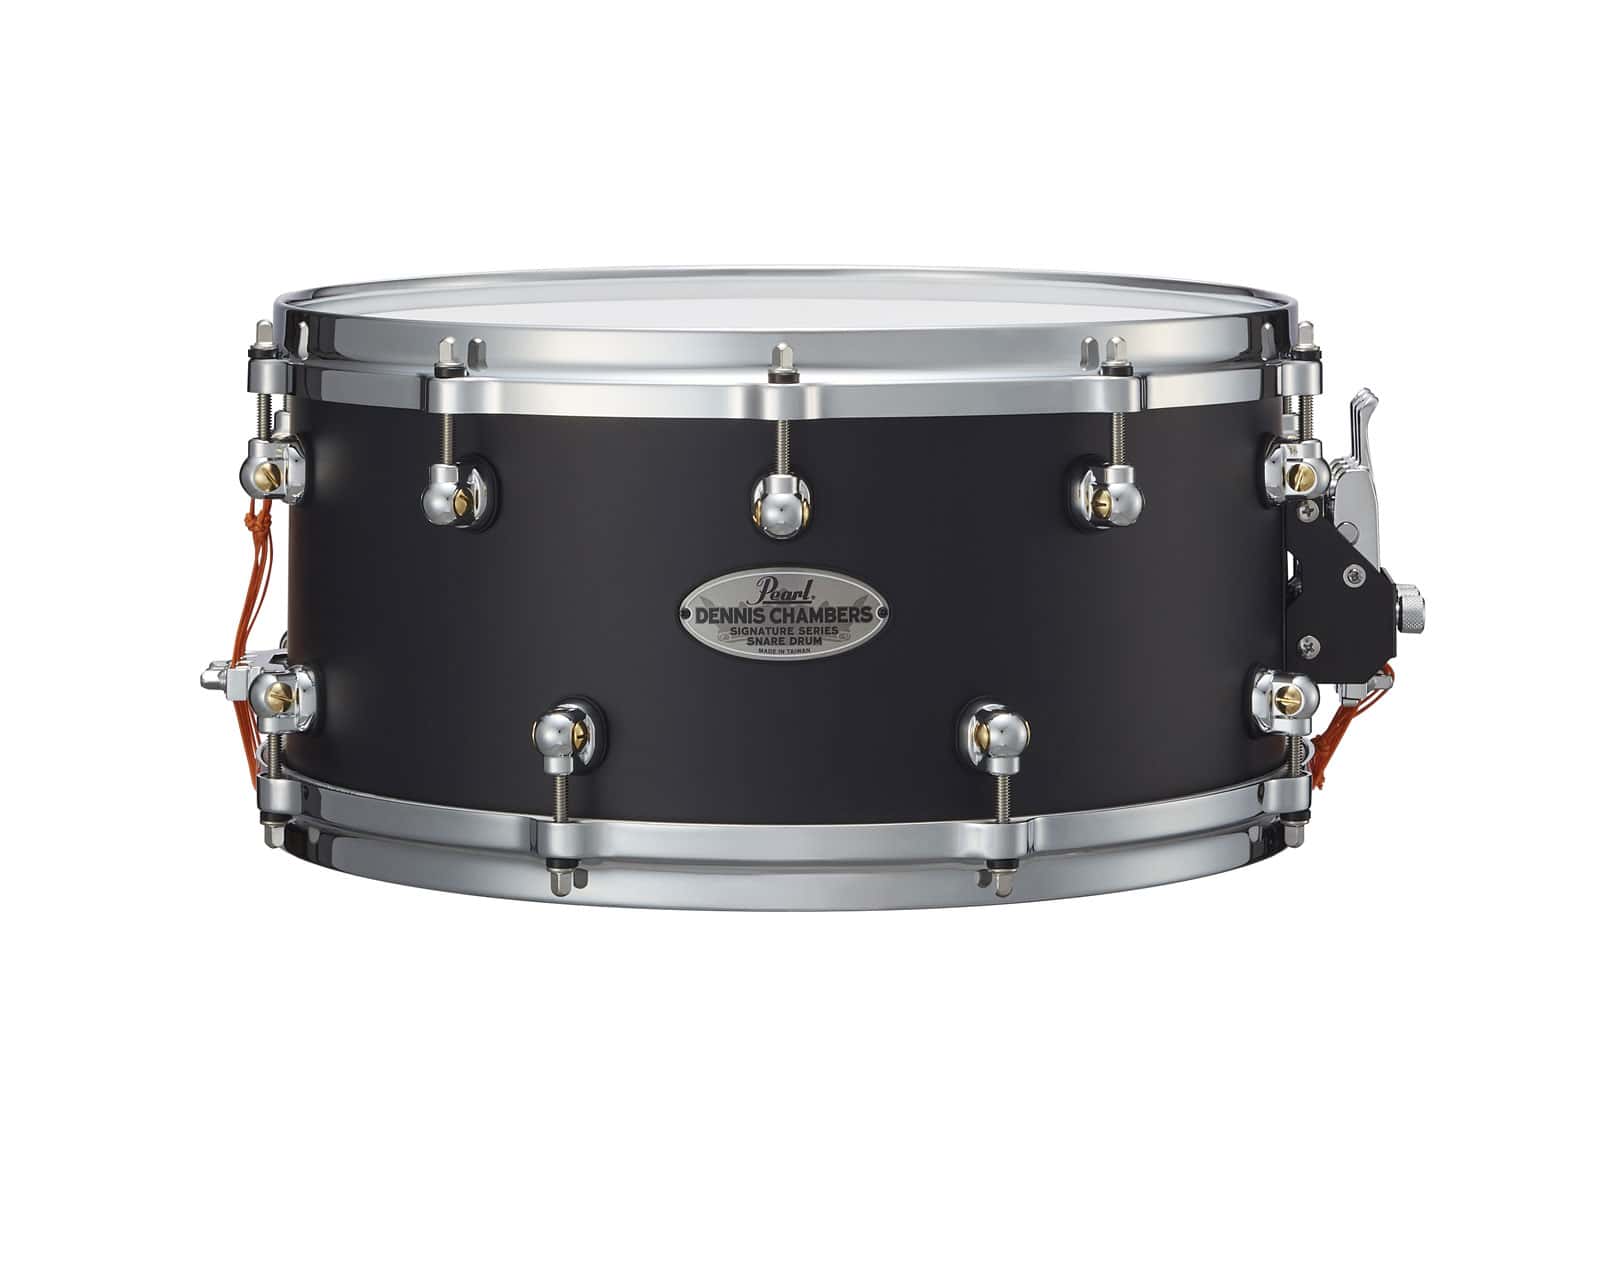 PEARL DRUMS SIGNATURE DENNIS CHAMBERS 14 X 6,5